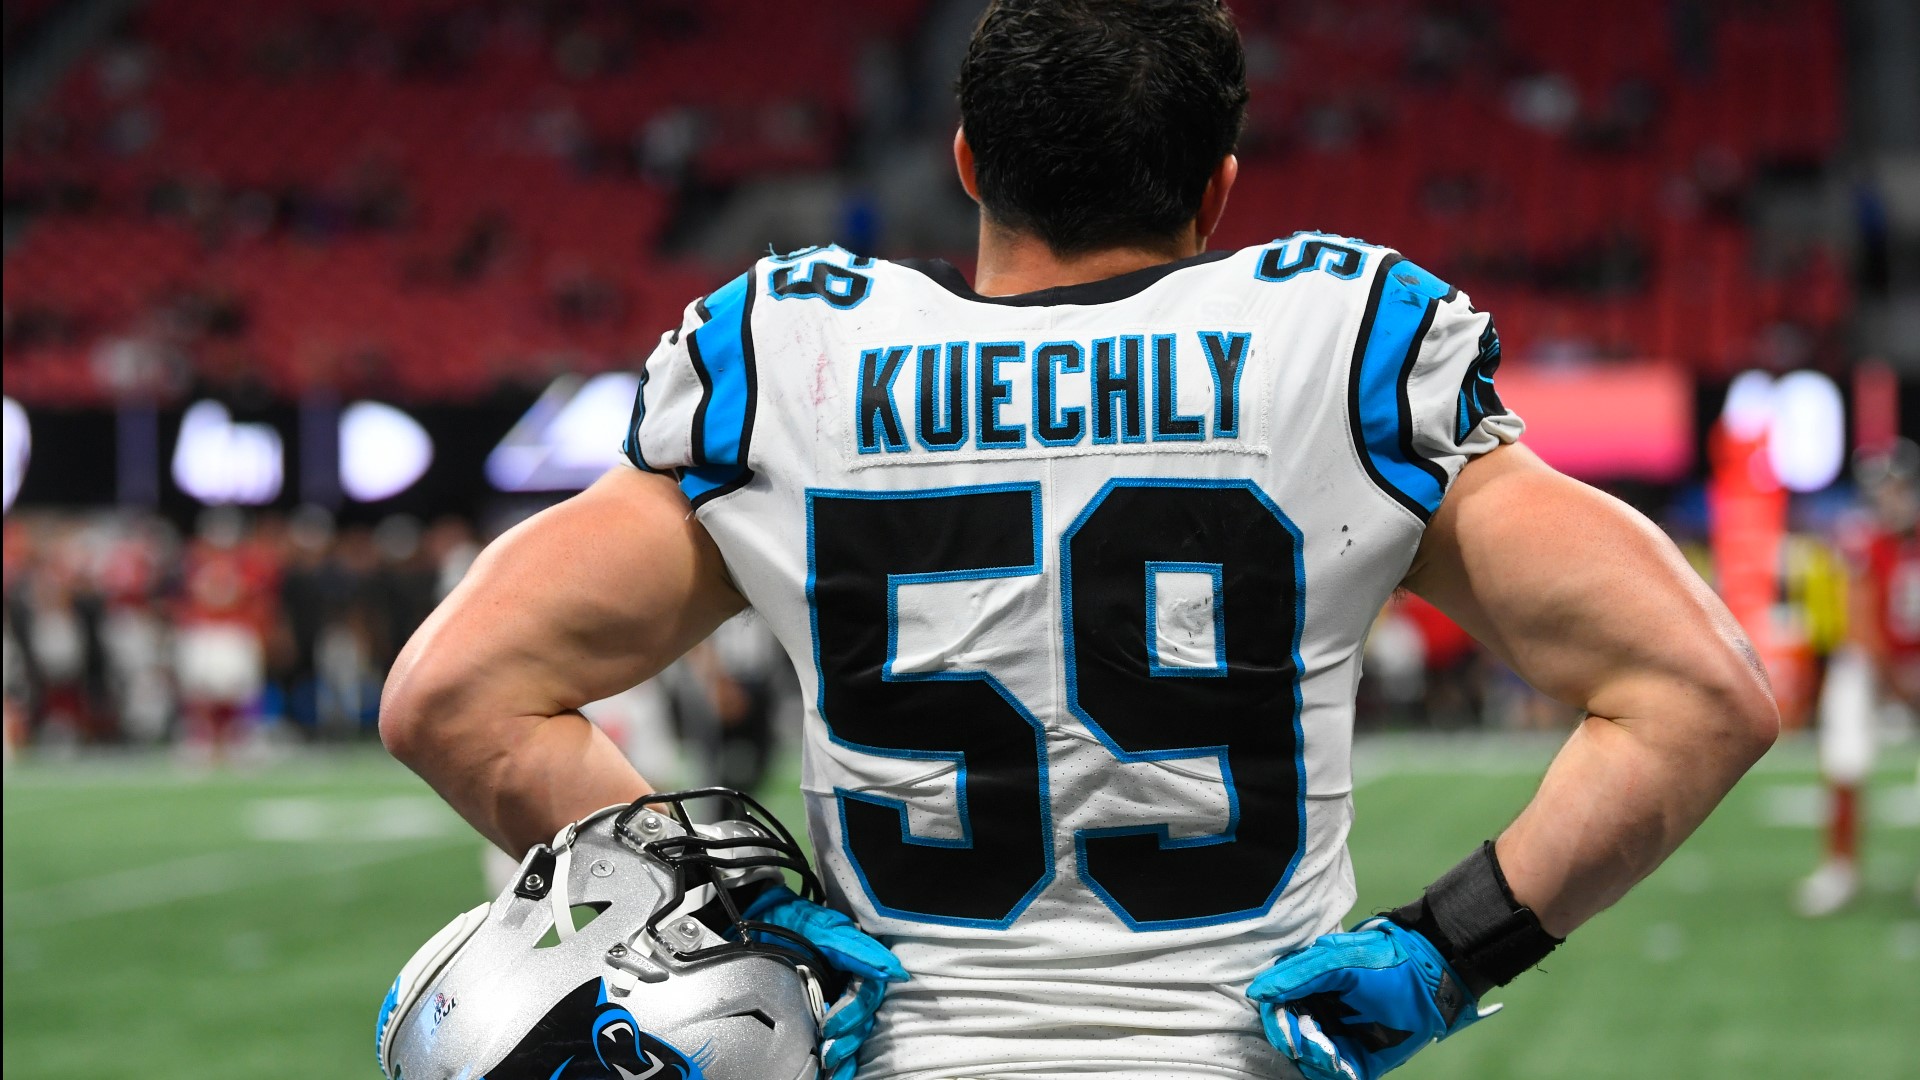 After eight seasons, superstar linebacker Luke Kuechly announced his retirement from the NFL. He spent his entire pro career with the Panthers.